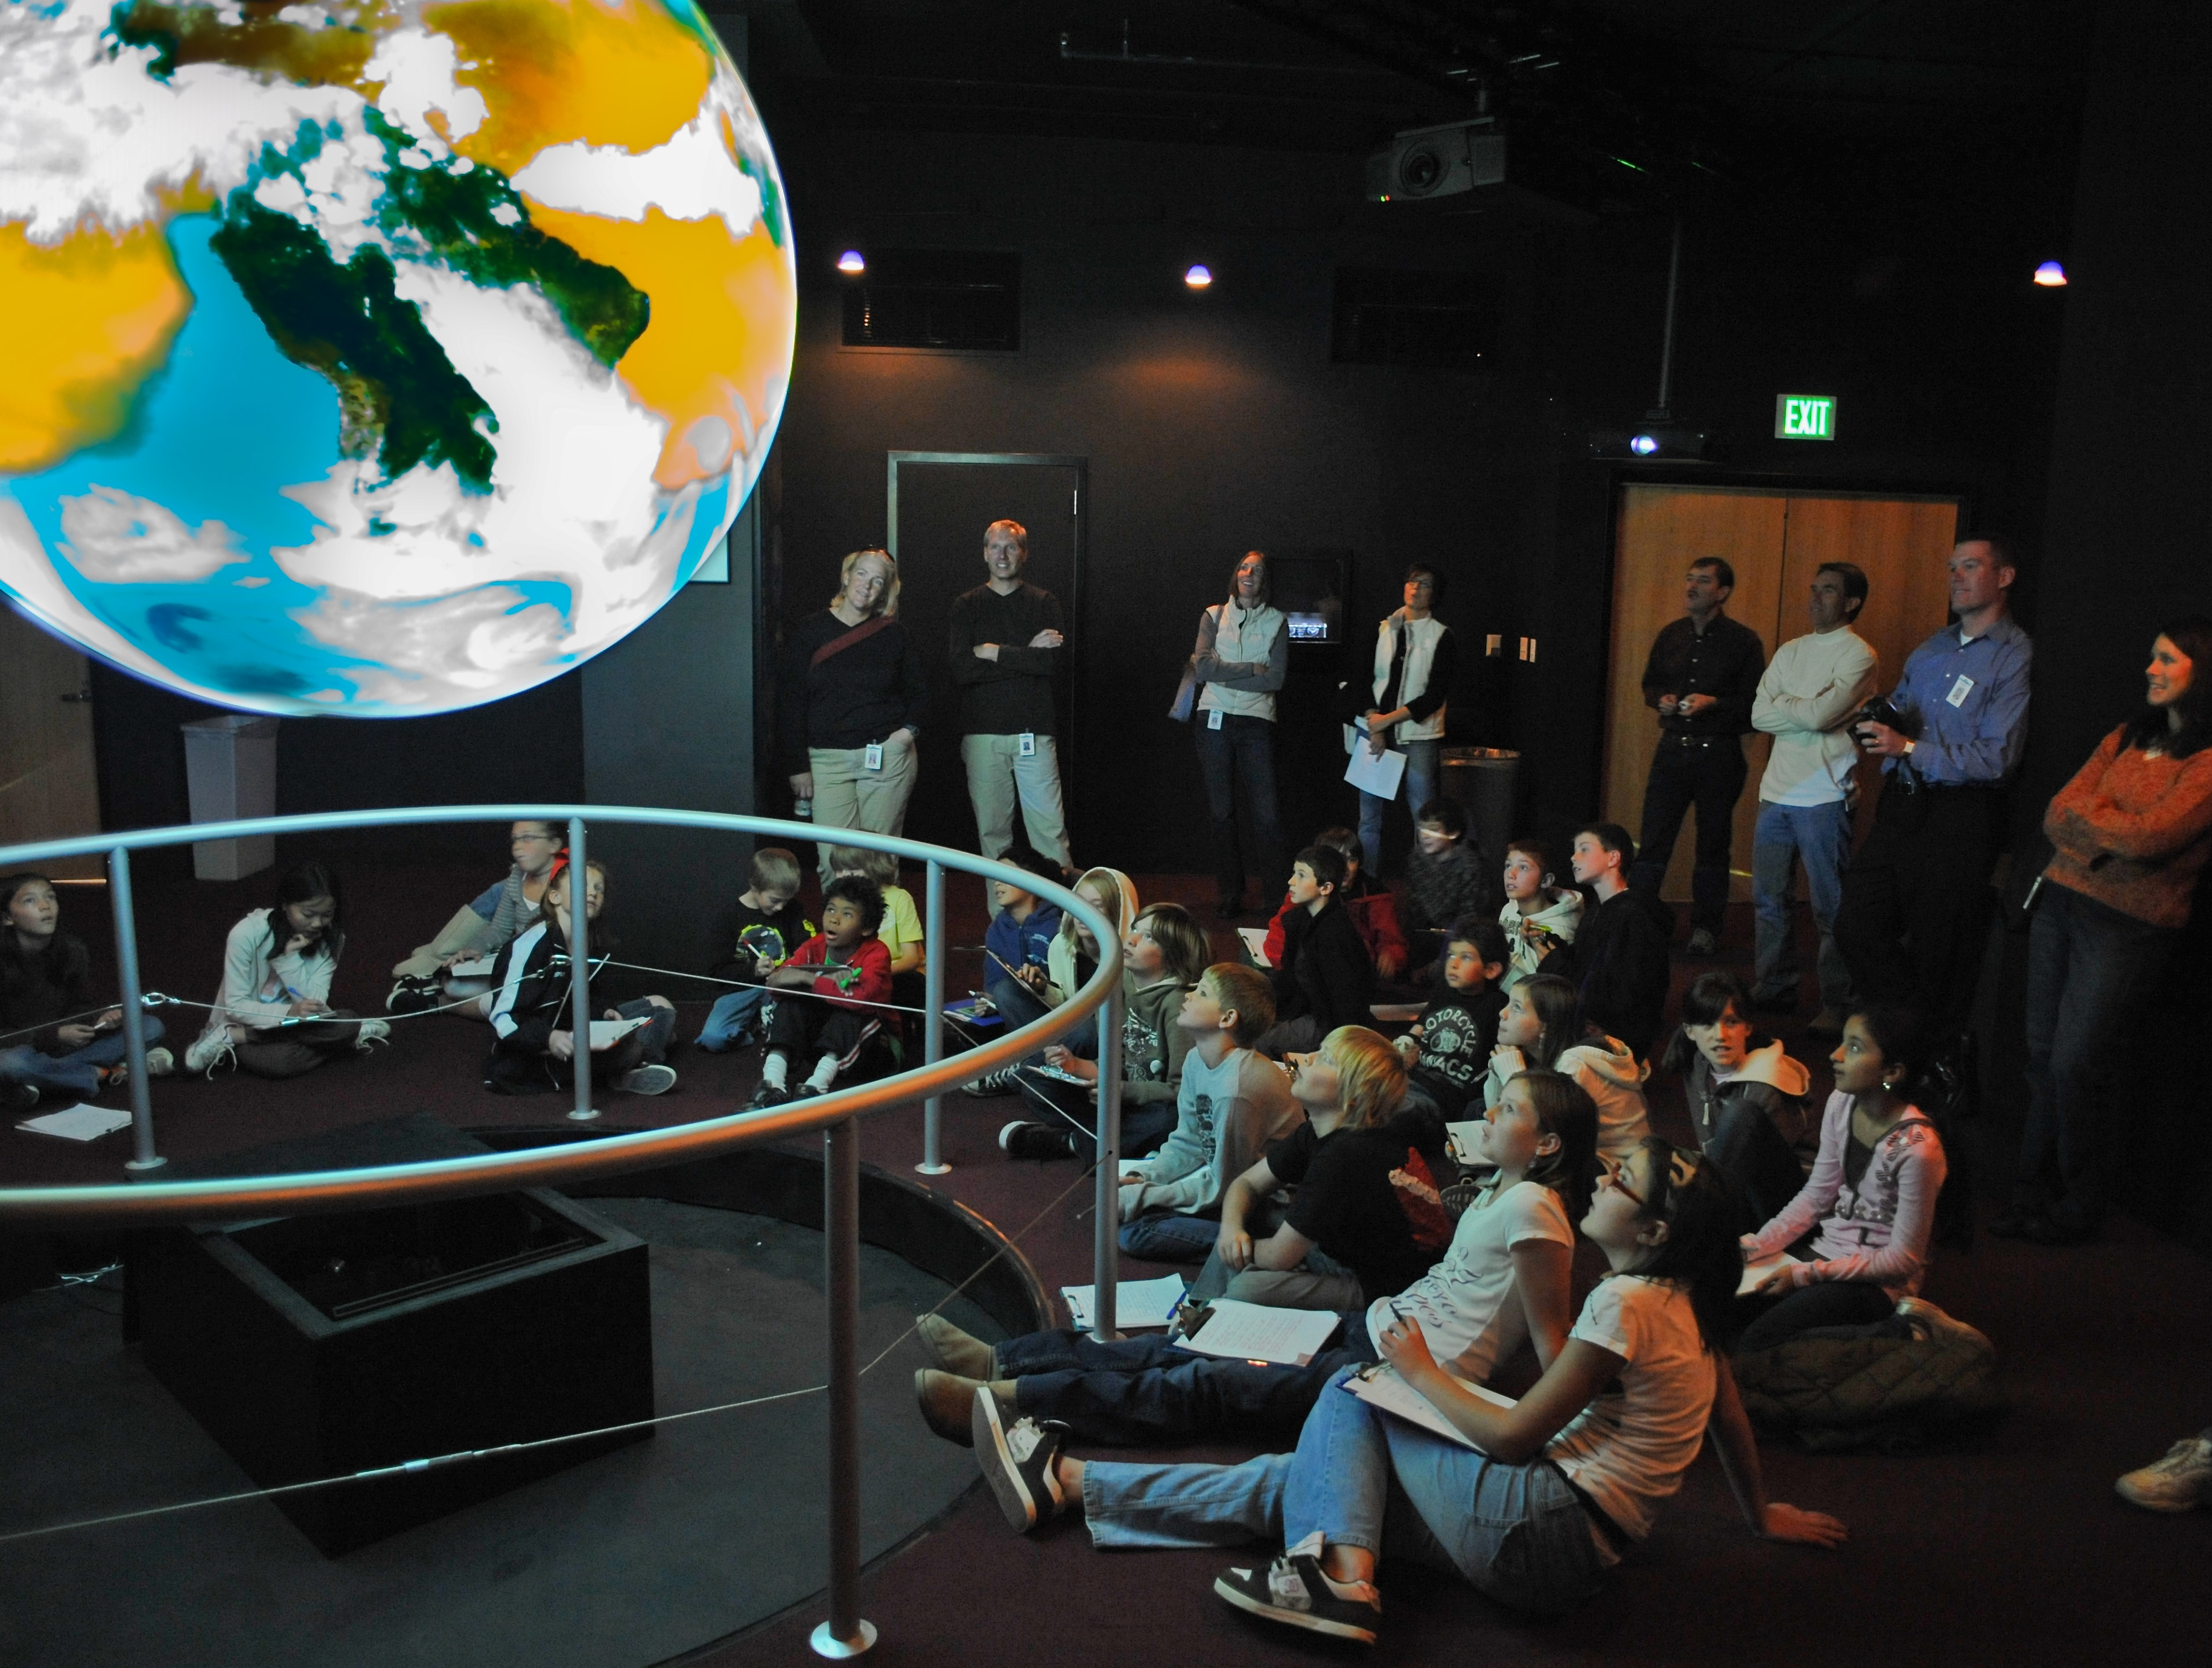 A group of children sit on the floor around Science On a Sphere as some adults stand behind them watching a presentation on Science On a Sphere